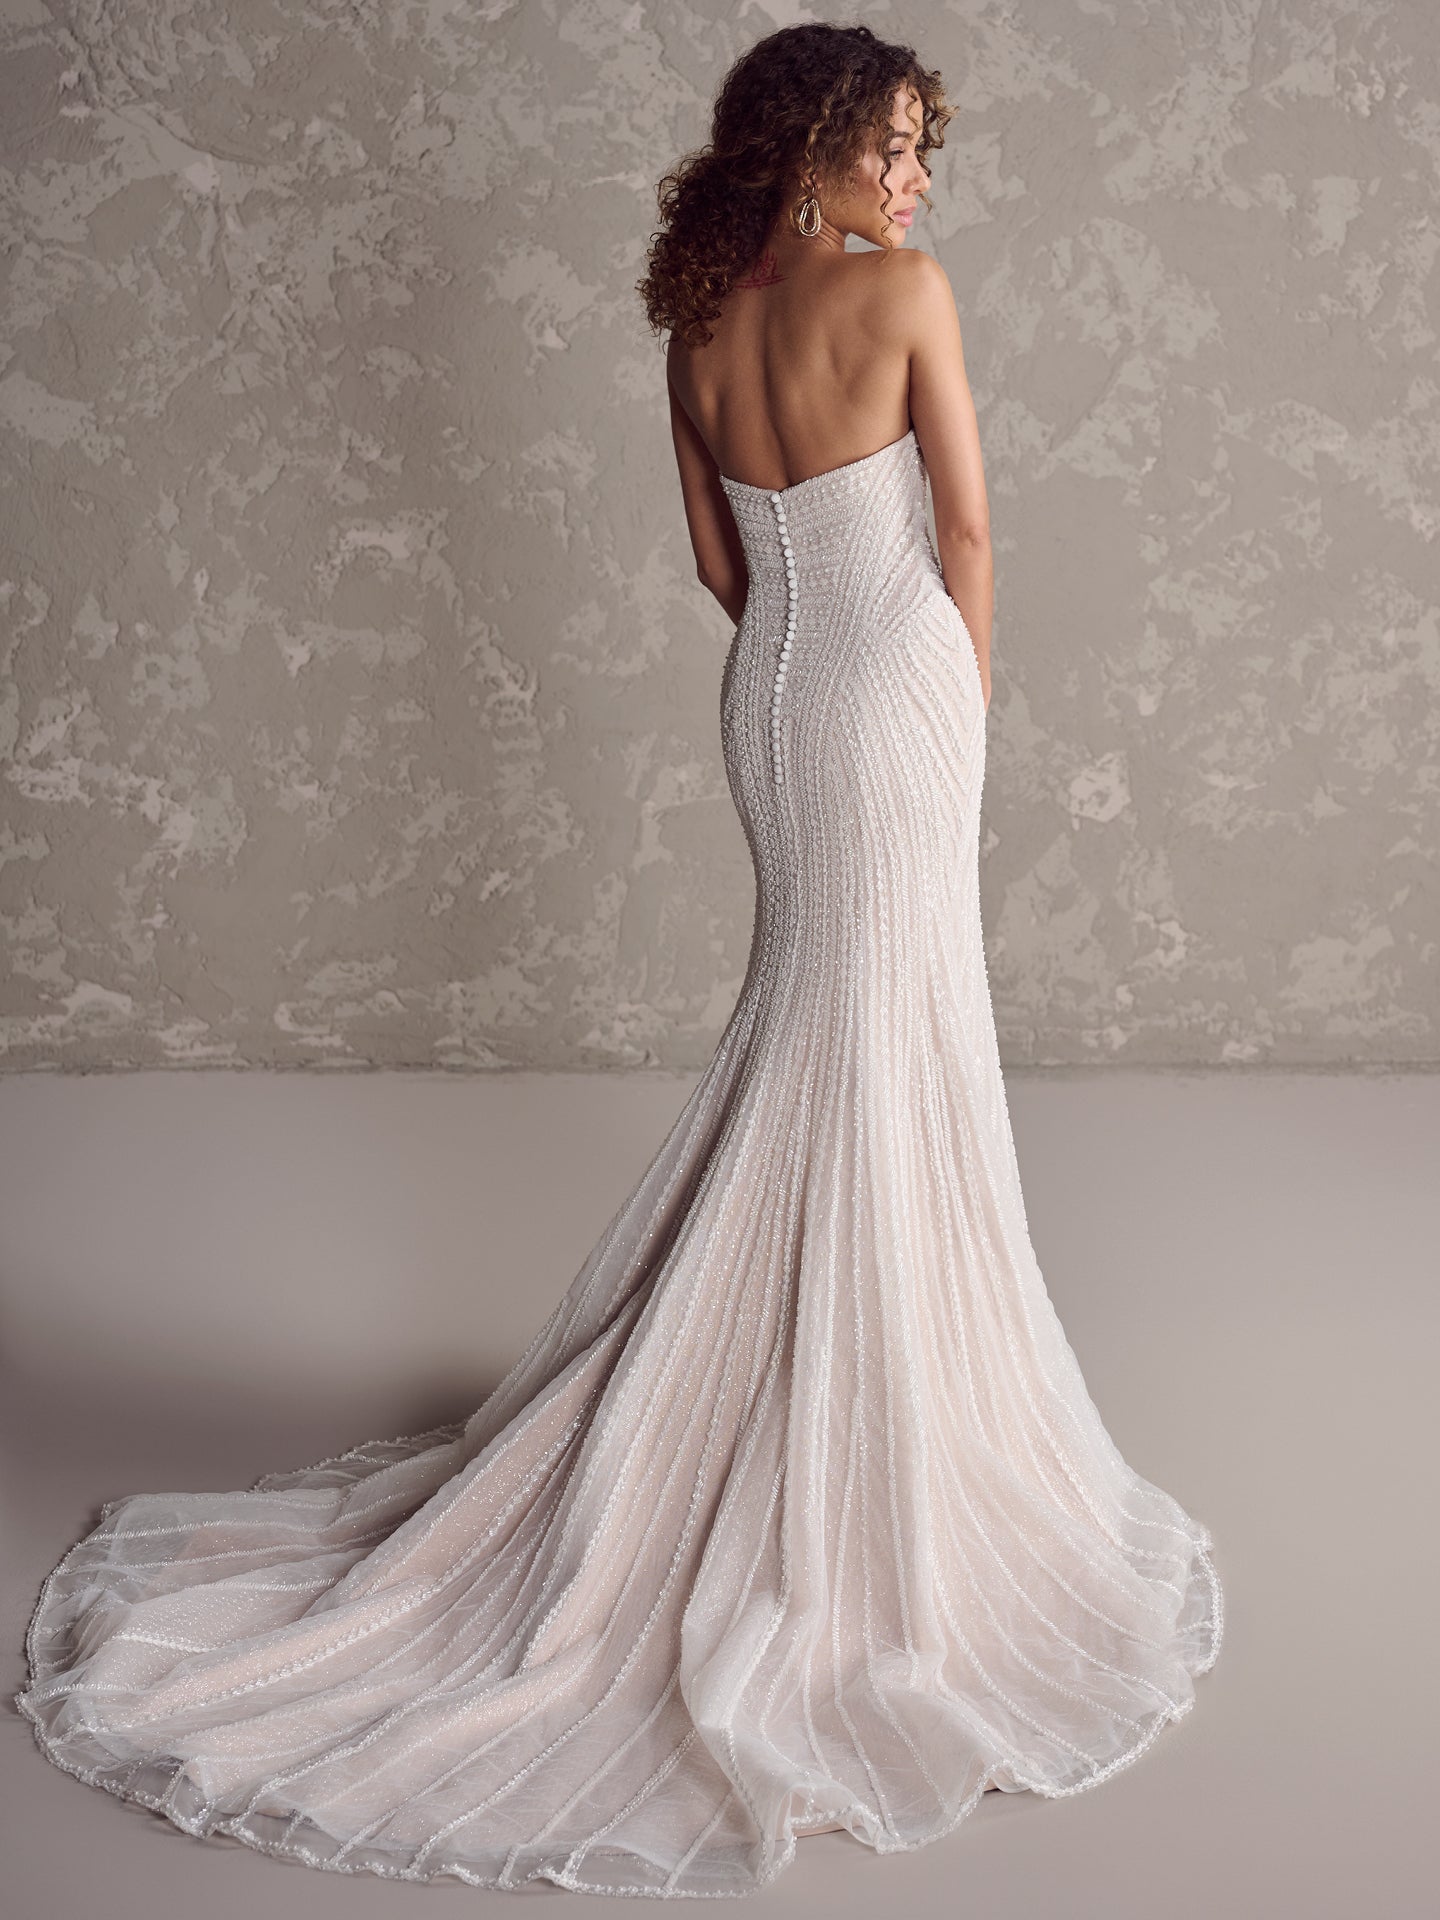 Strapless Beaded Fit-and-Flare Gown by Maggie Sottero - Image 2